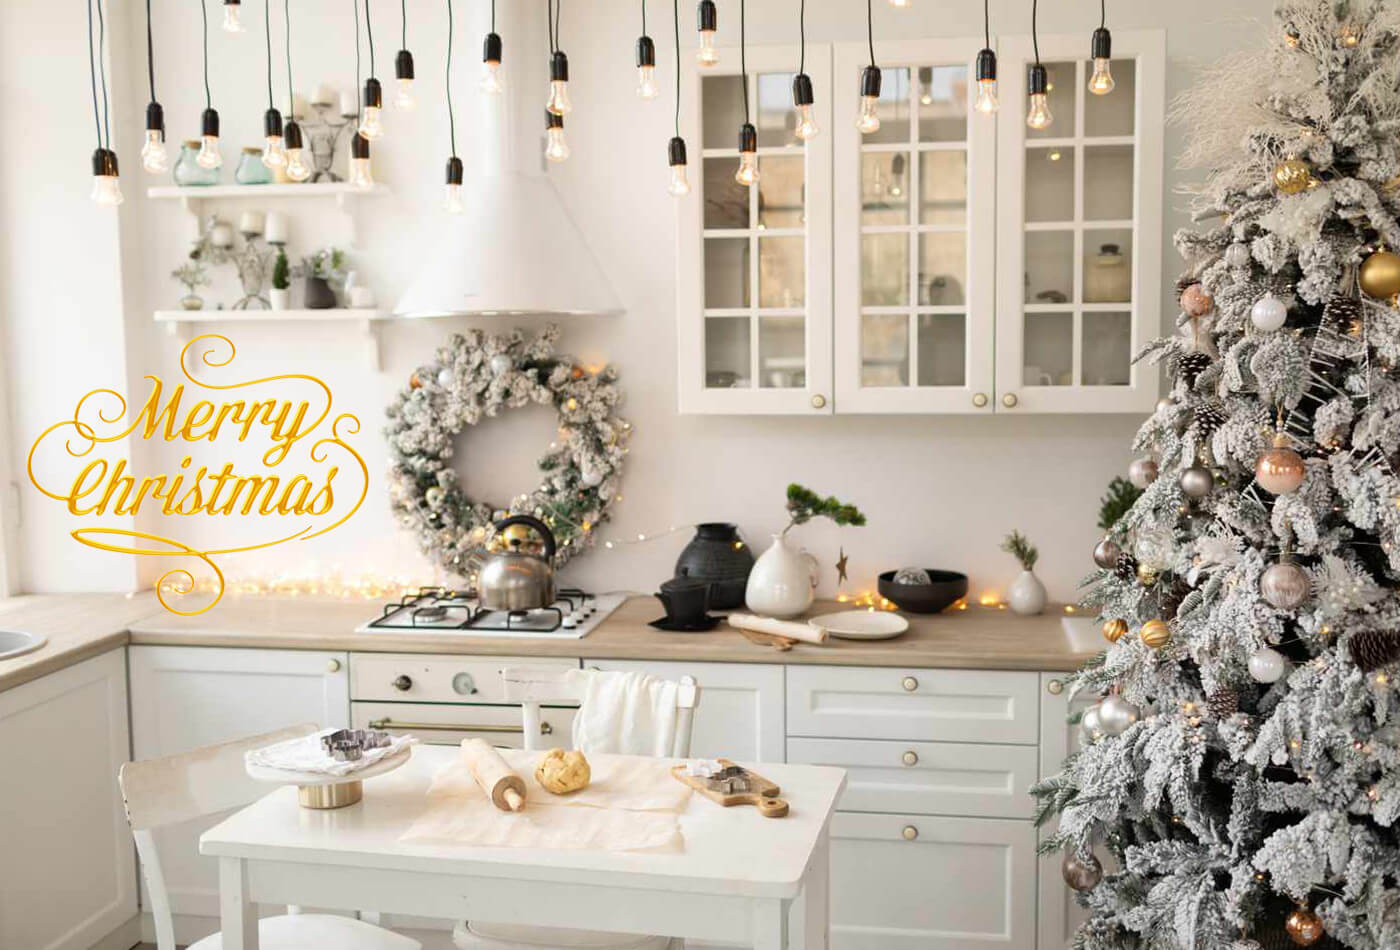 Transform Your Christmas Kitchen: Festive Decor And Recipes